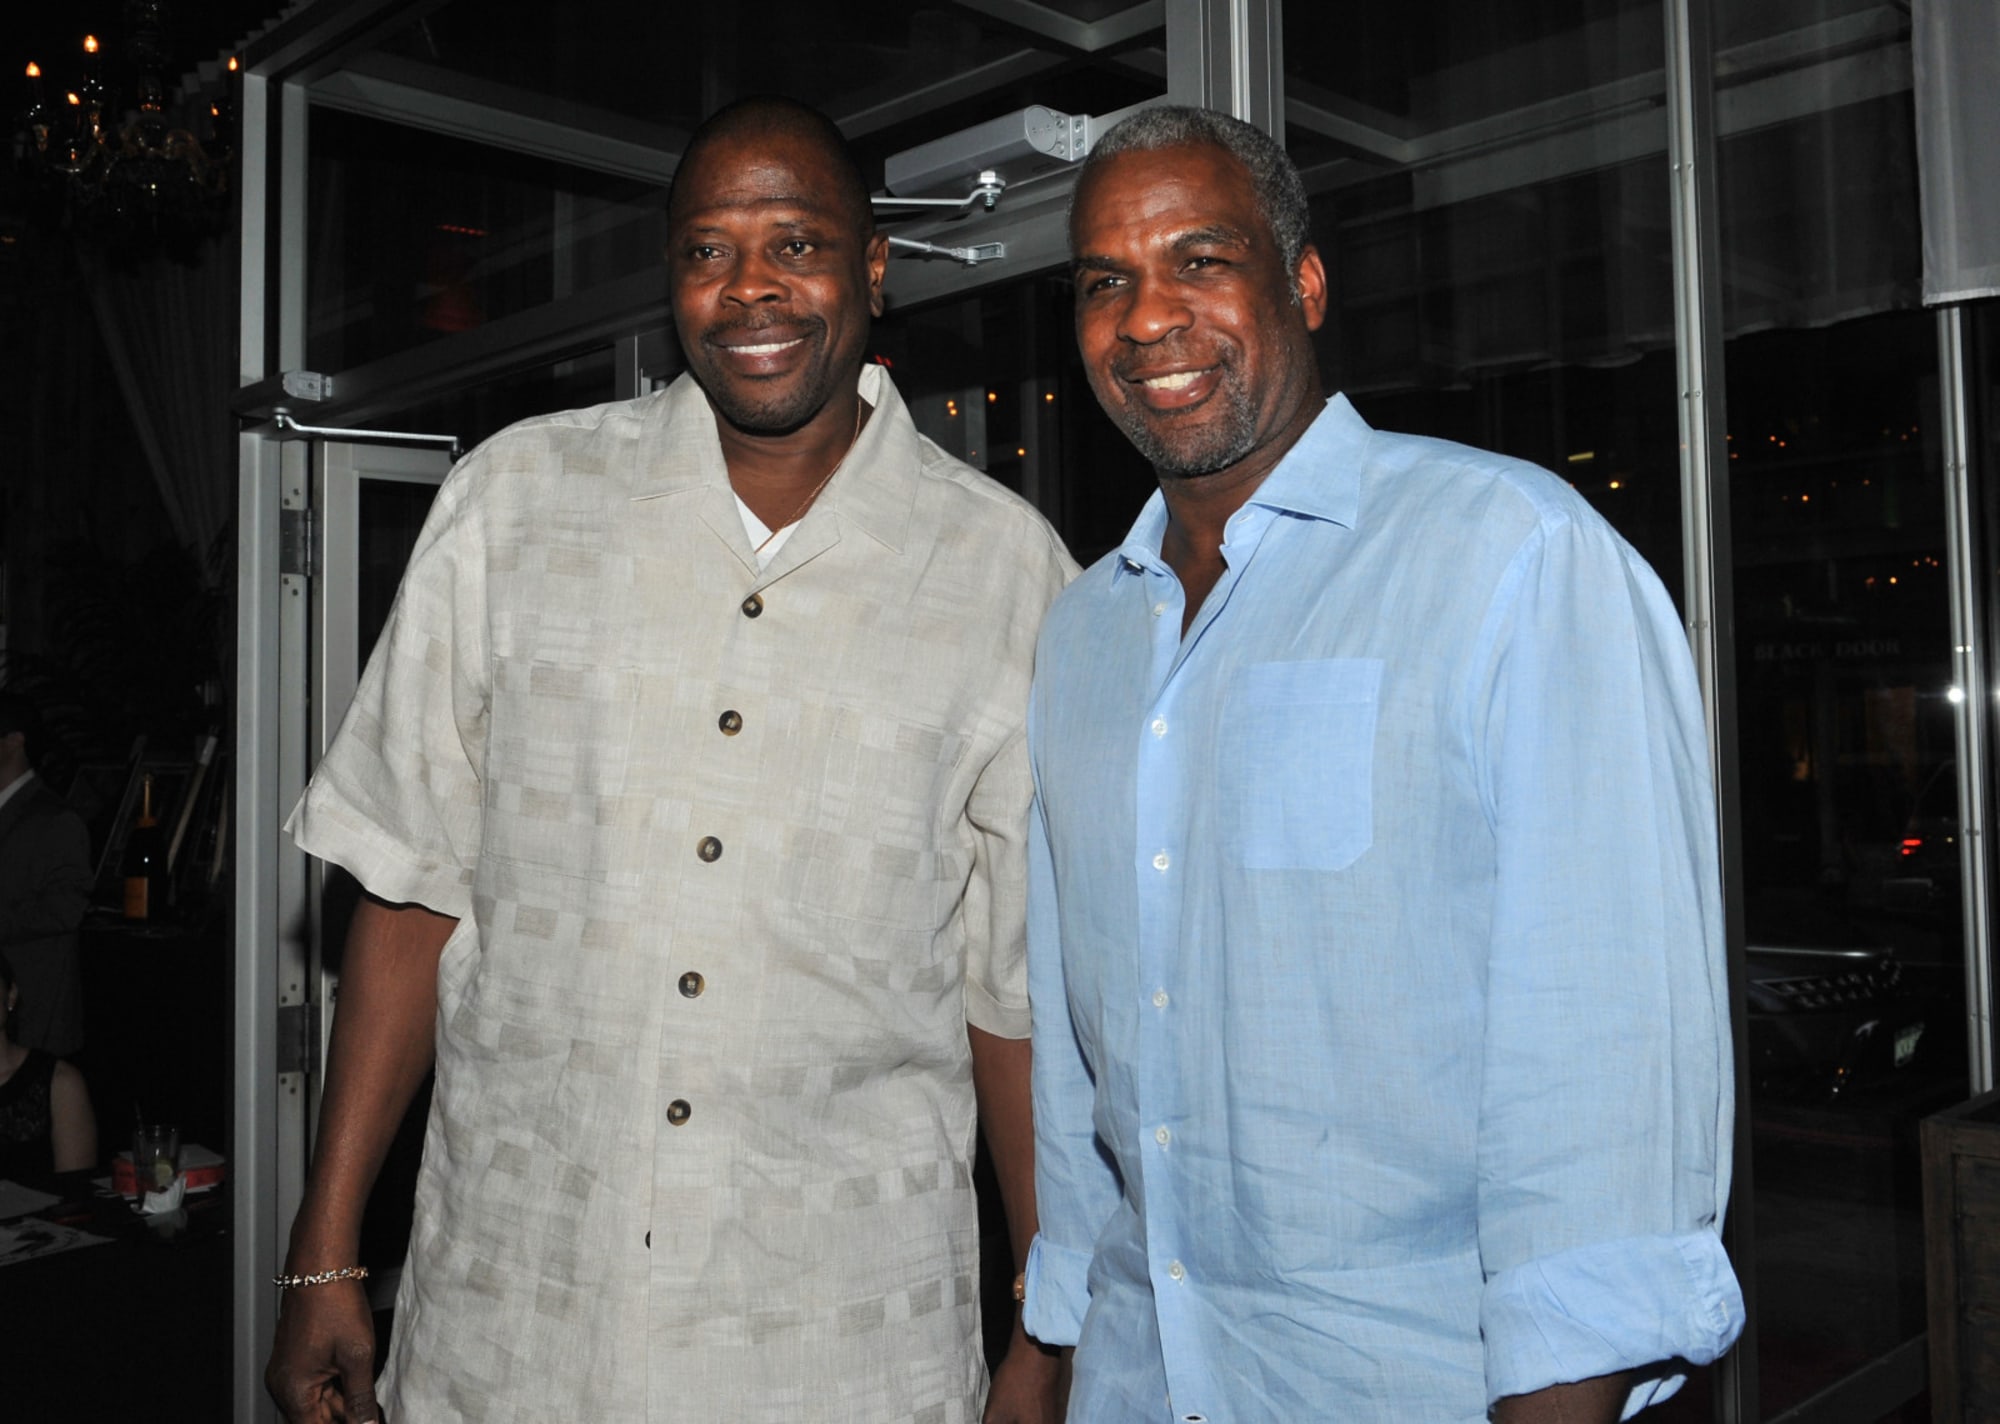 NY Knicks: After Patrick Ewing COVID-19 diagnosis, Oakley offers  encouragement